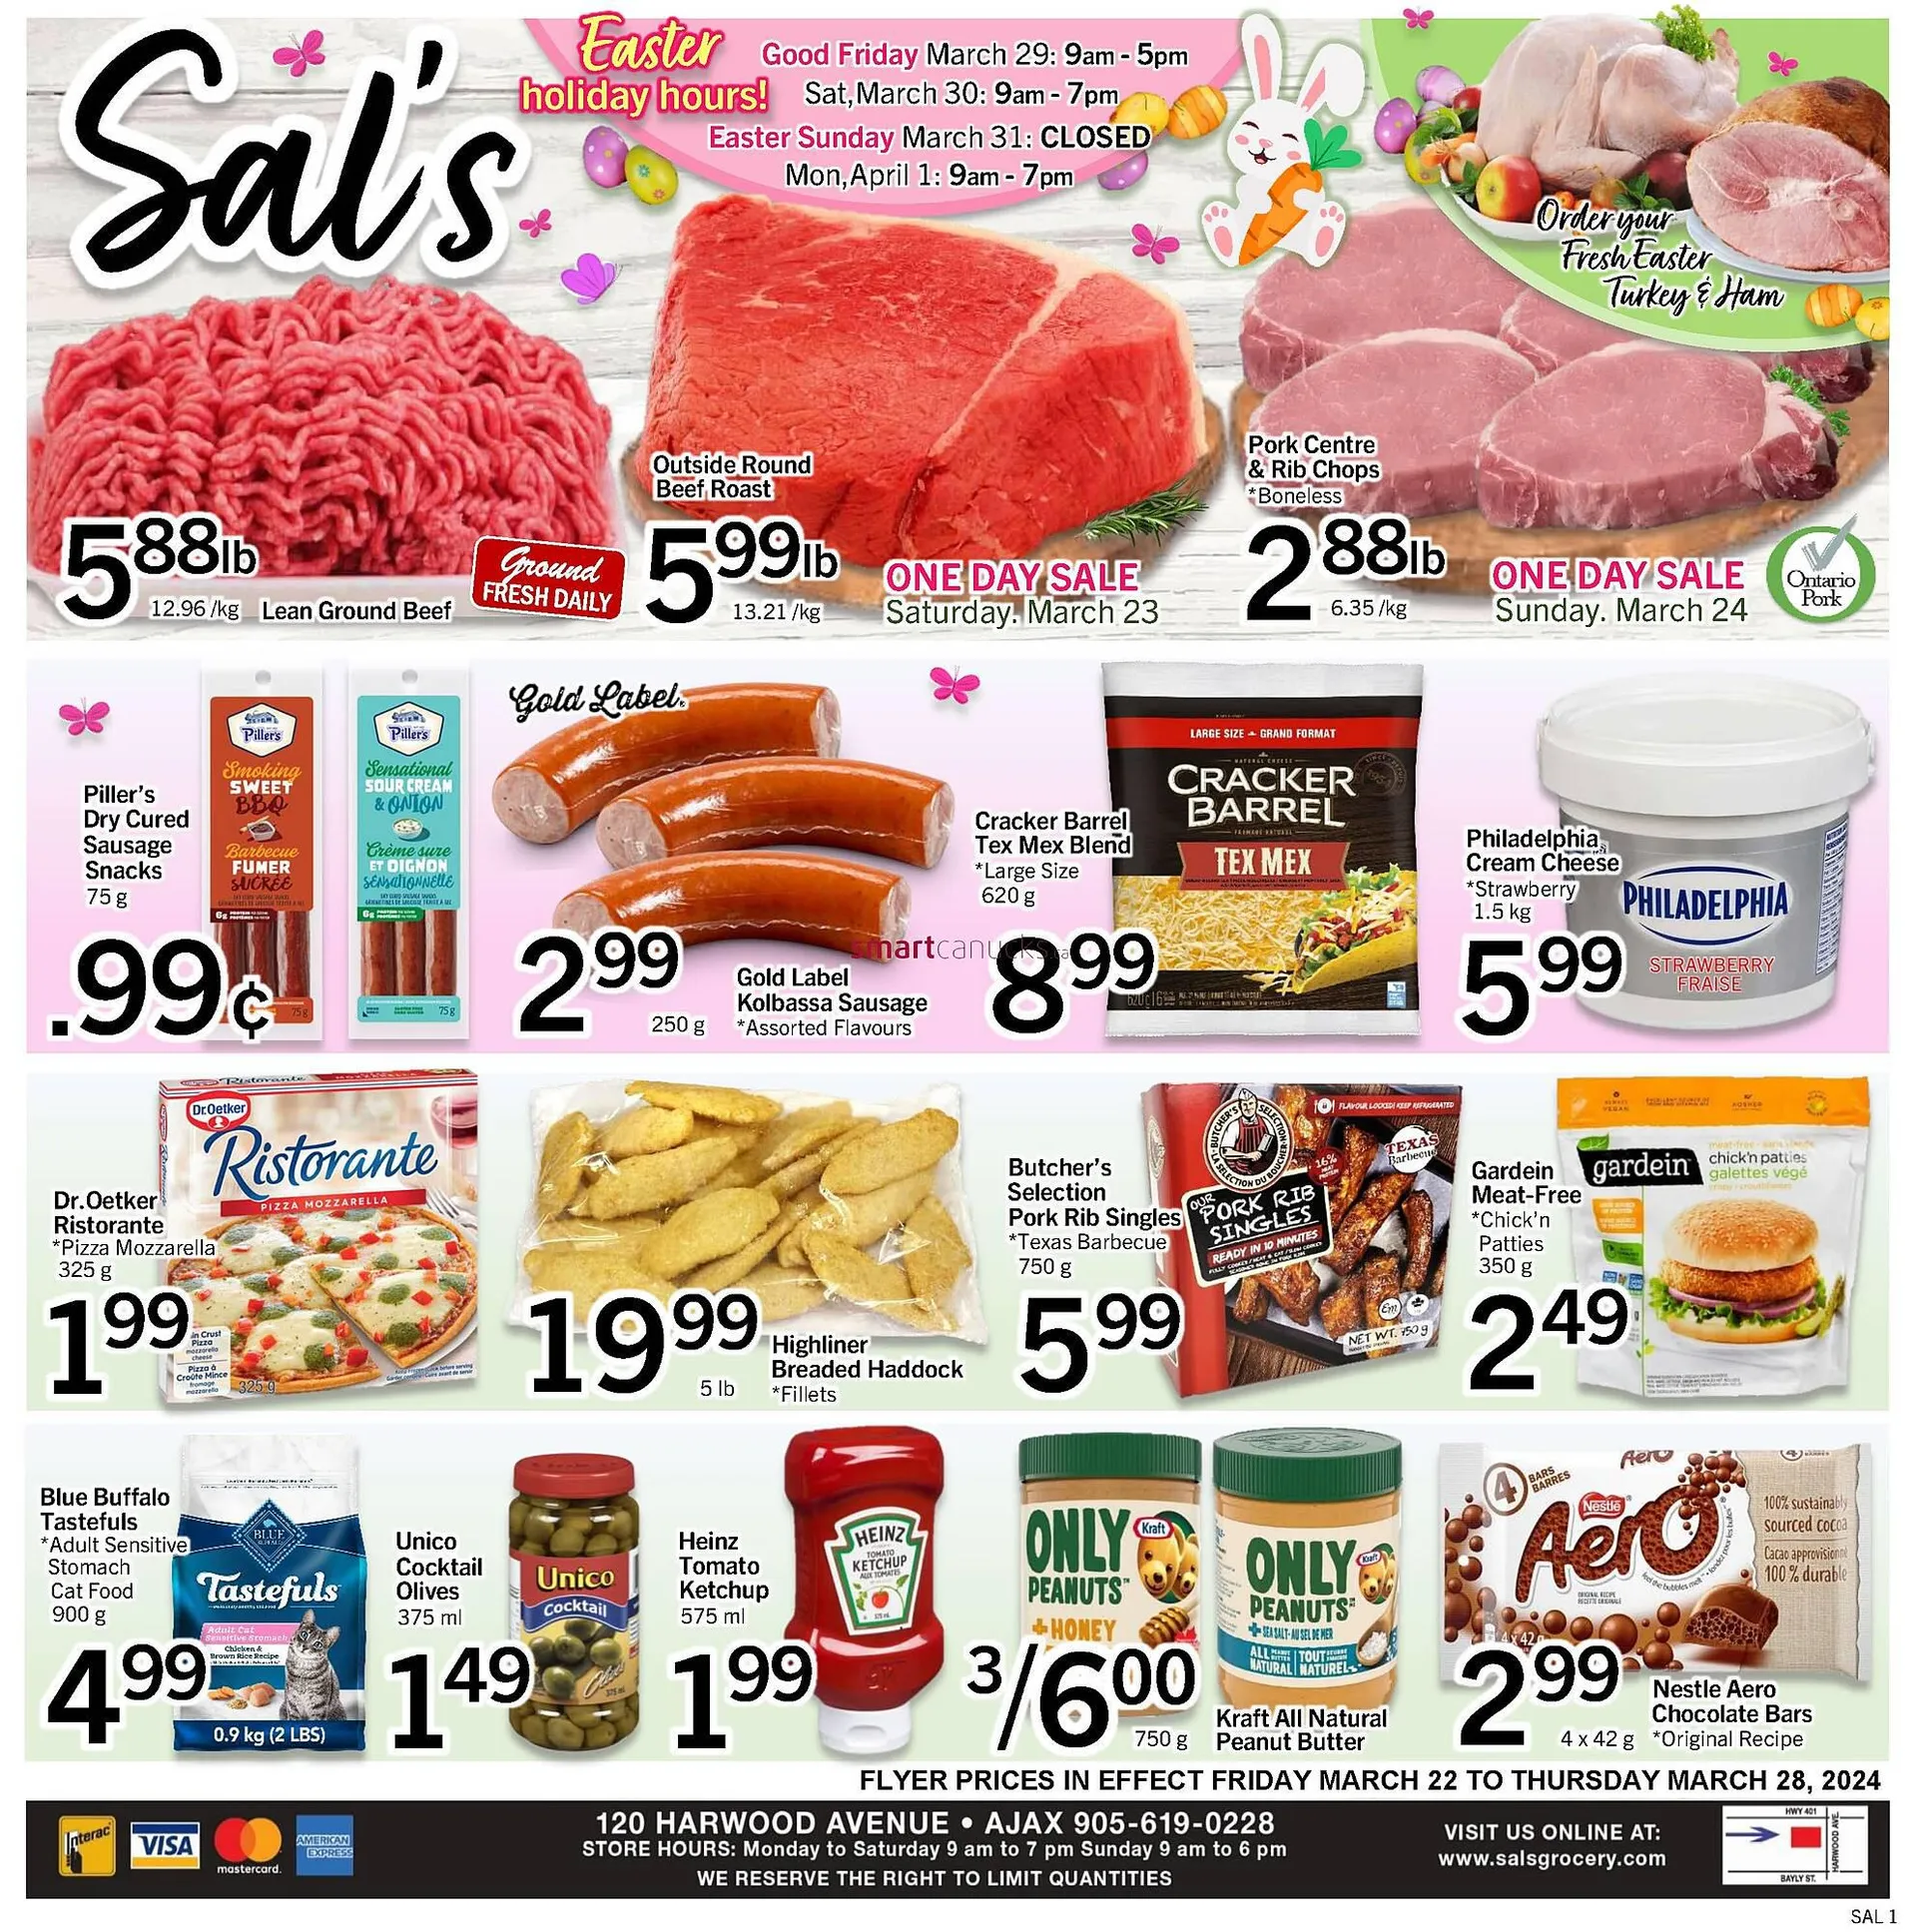 Sal's Grocery flyer from March 22 to March 28 2024 - flyer page 